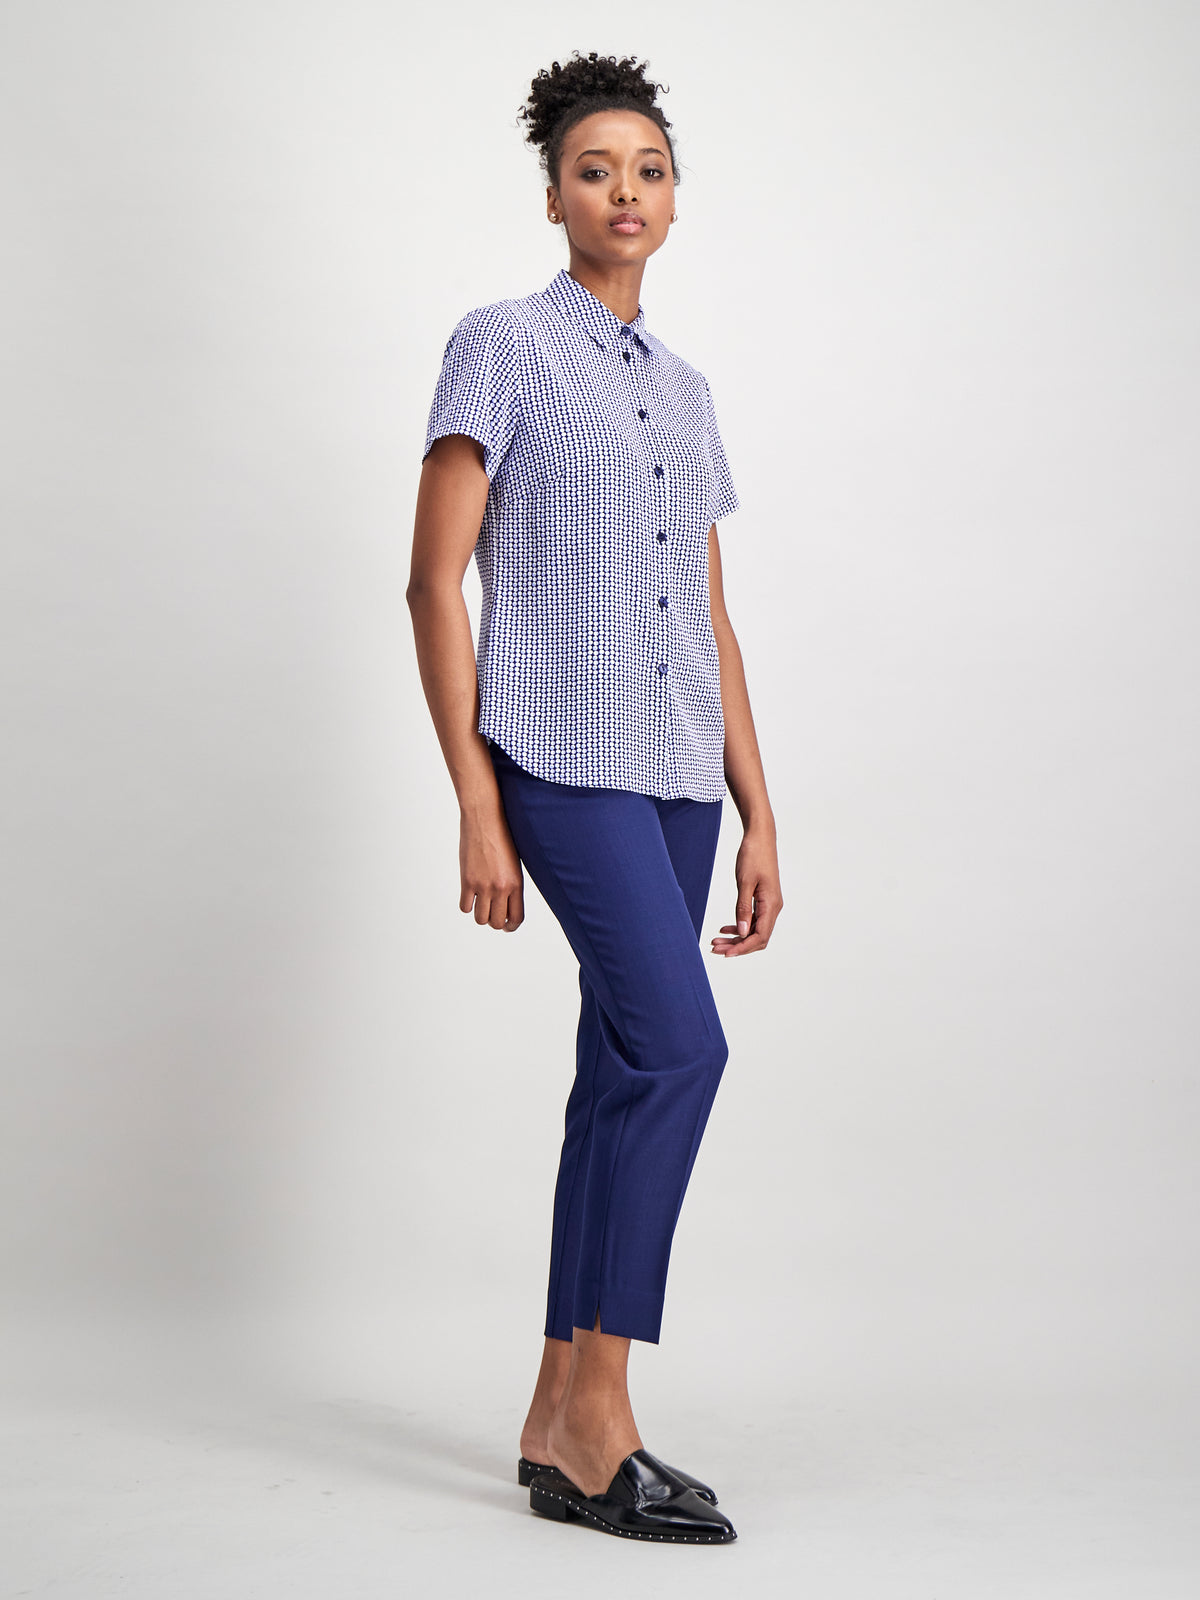 Carrie classic buttoned shirt - blue print